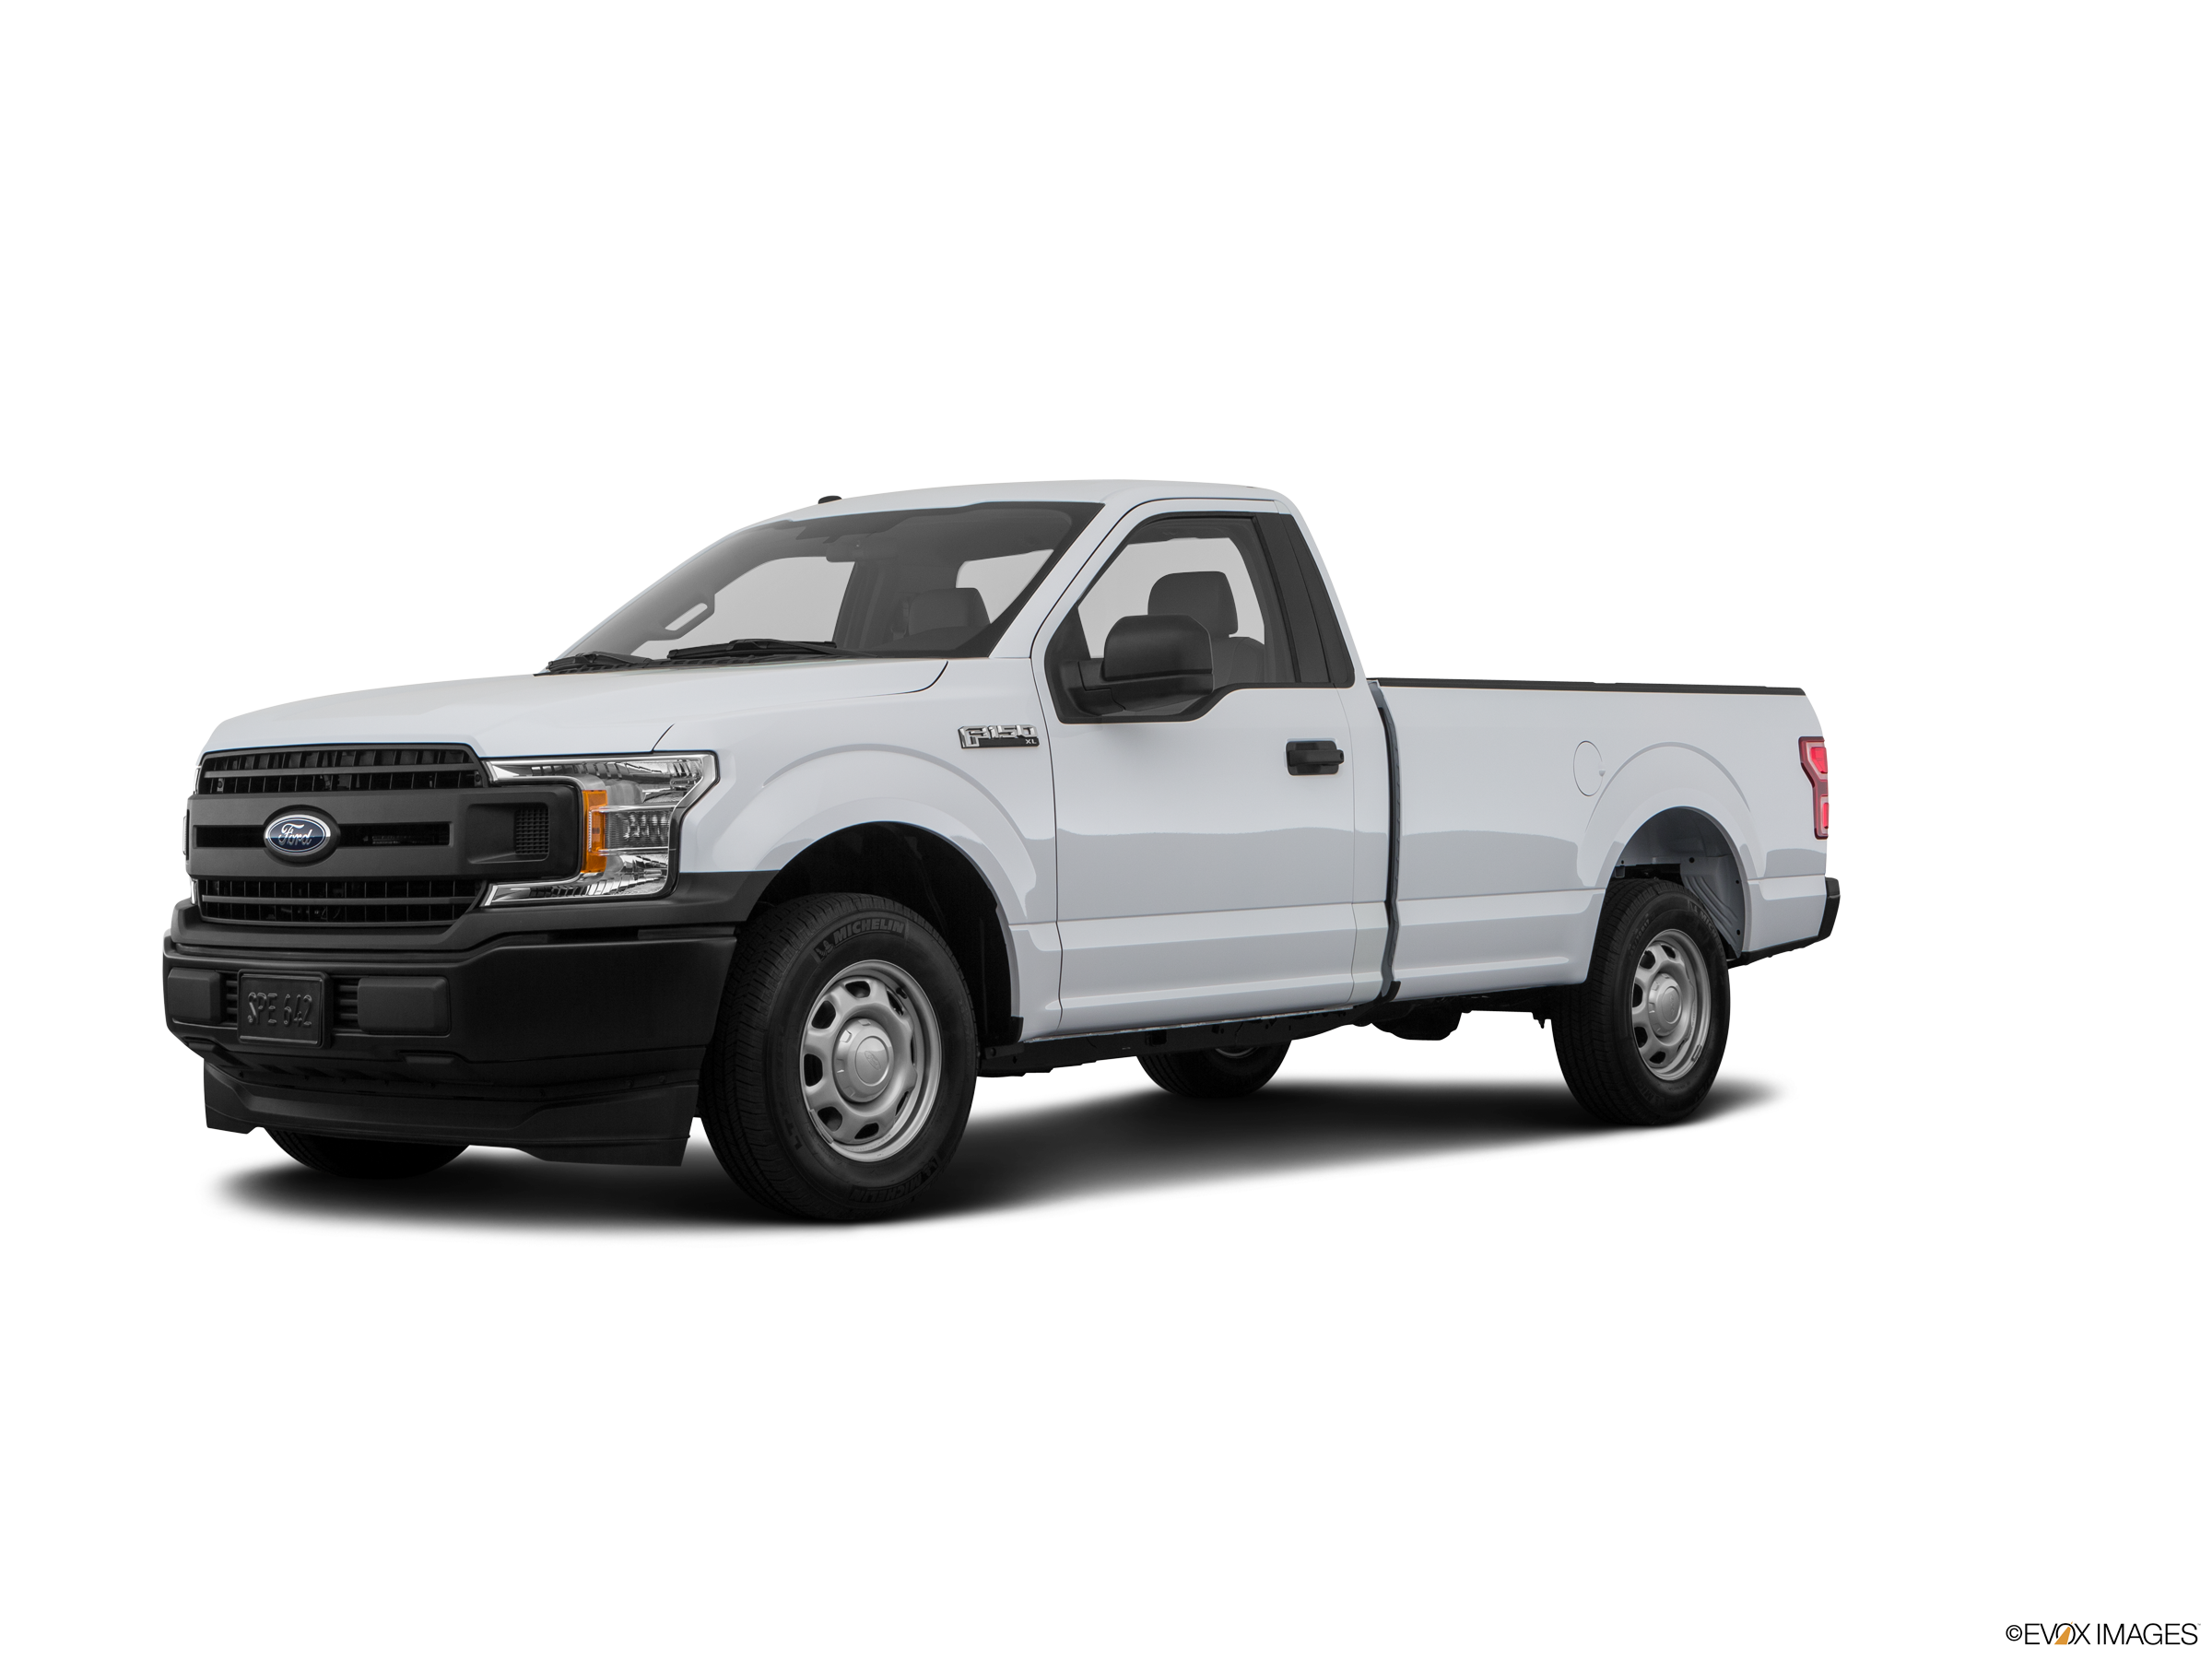 2020 Ford F150 Regular Cab Price, Value, Ratings & Reviews